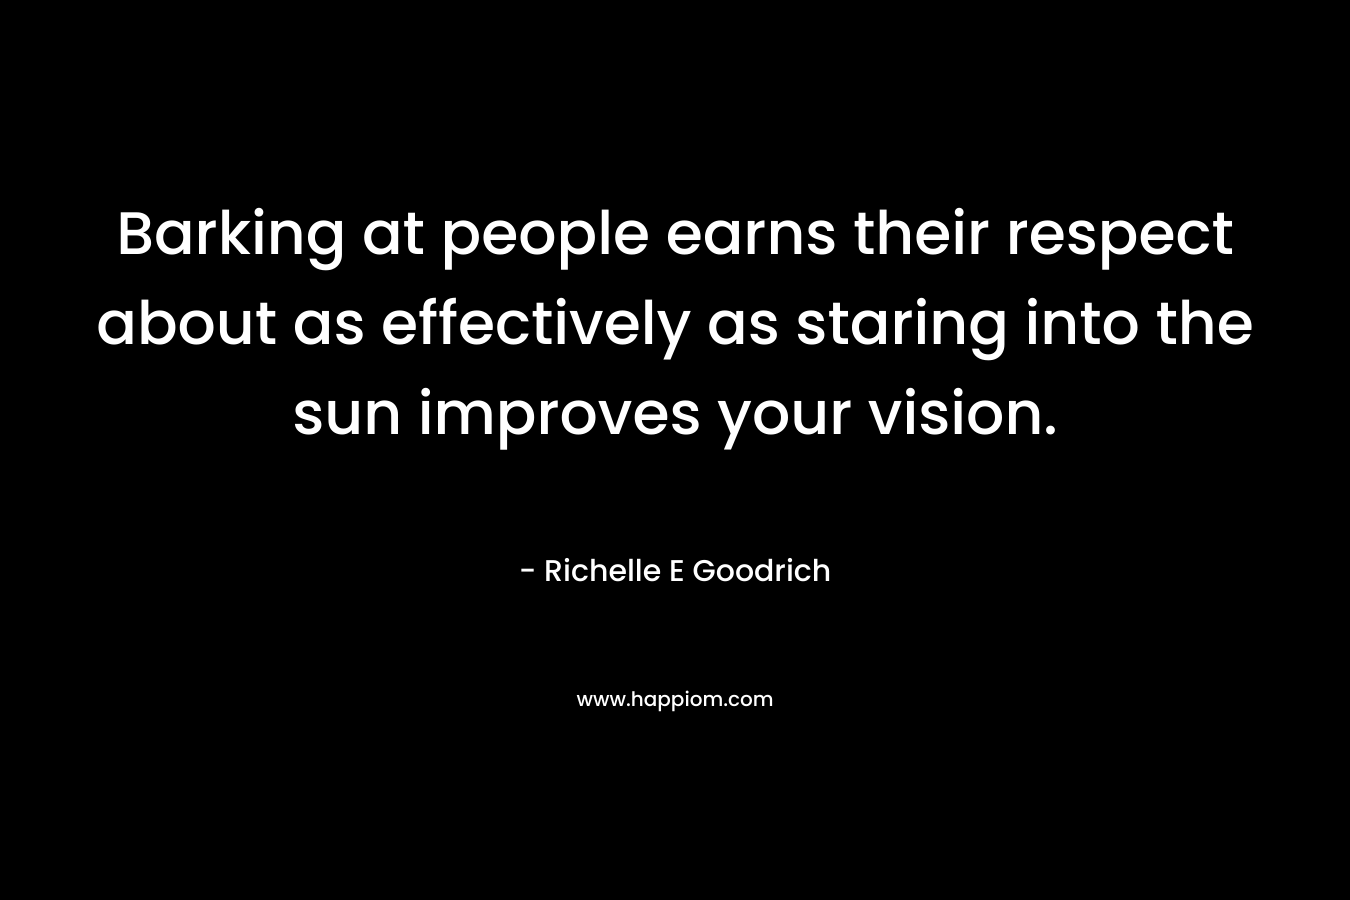 Barking at people earns their respect about as effectively as staring into the sun improves your vision. – Richelle E Goodrich